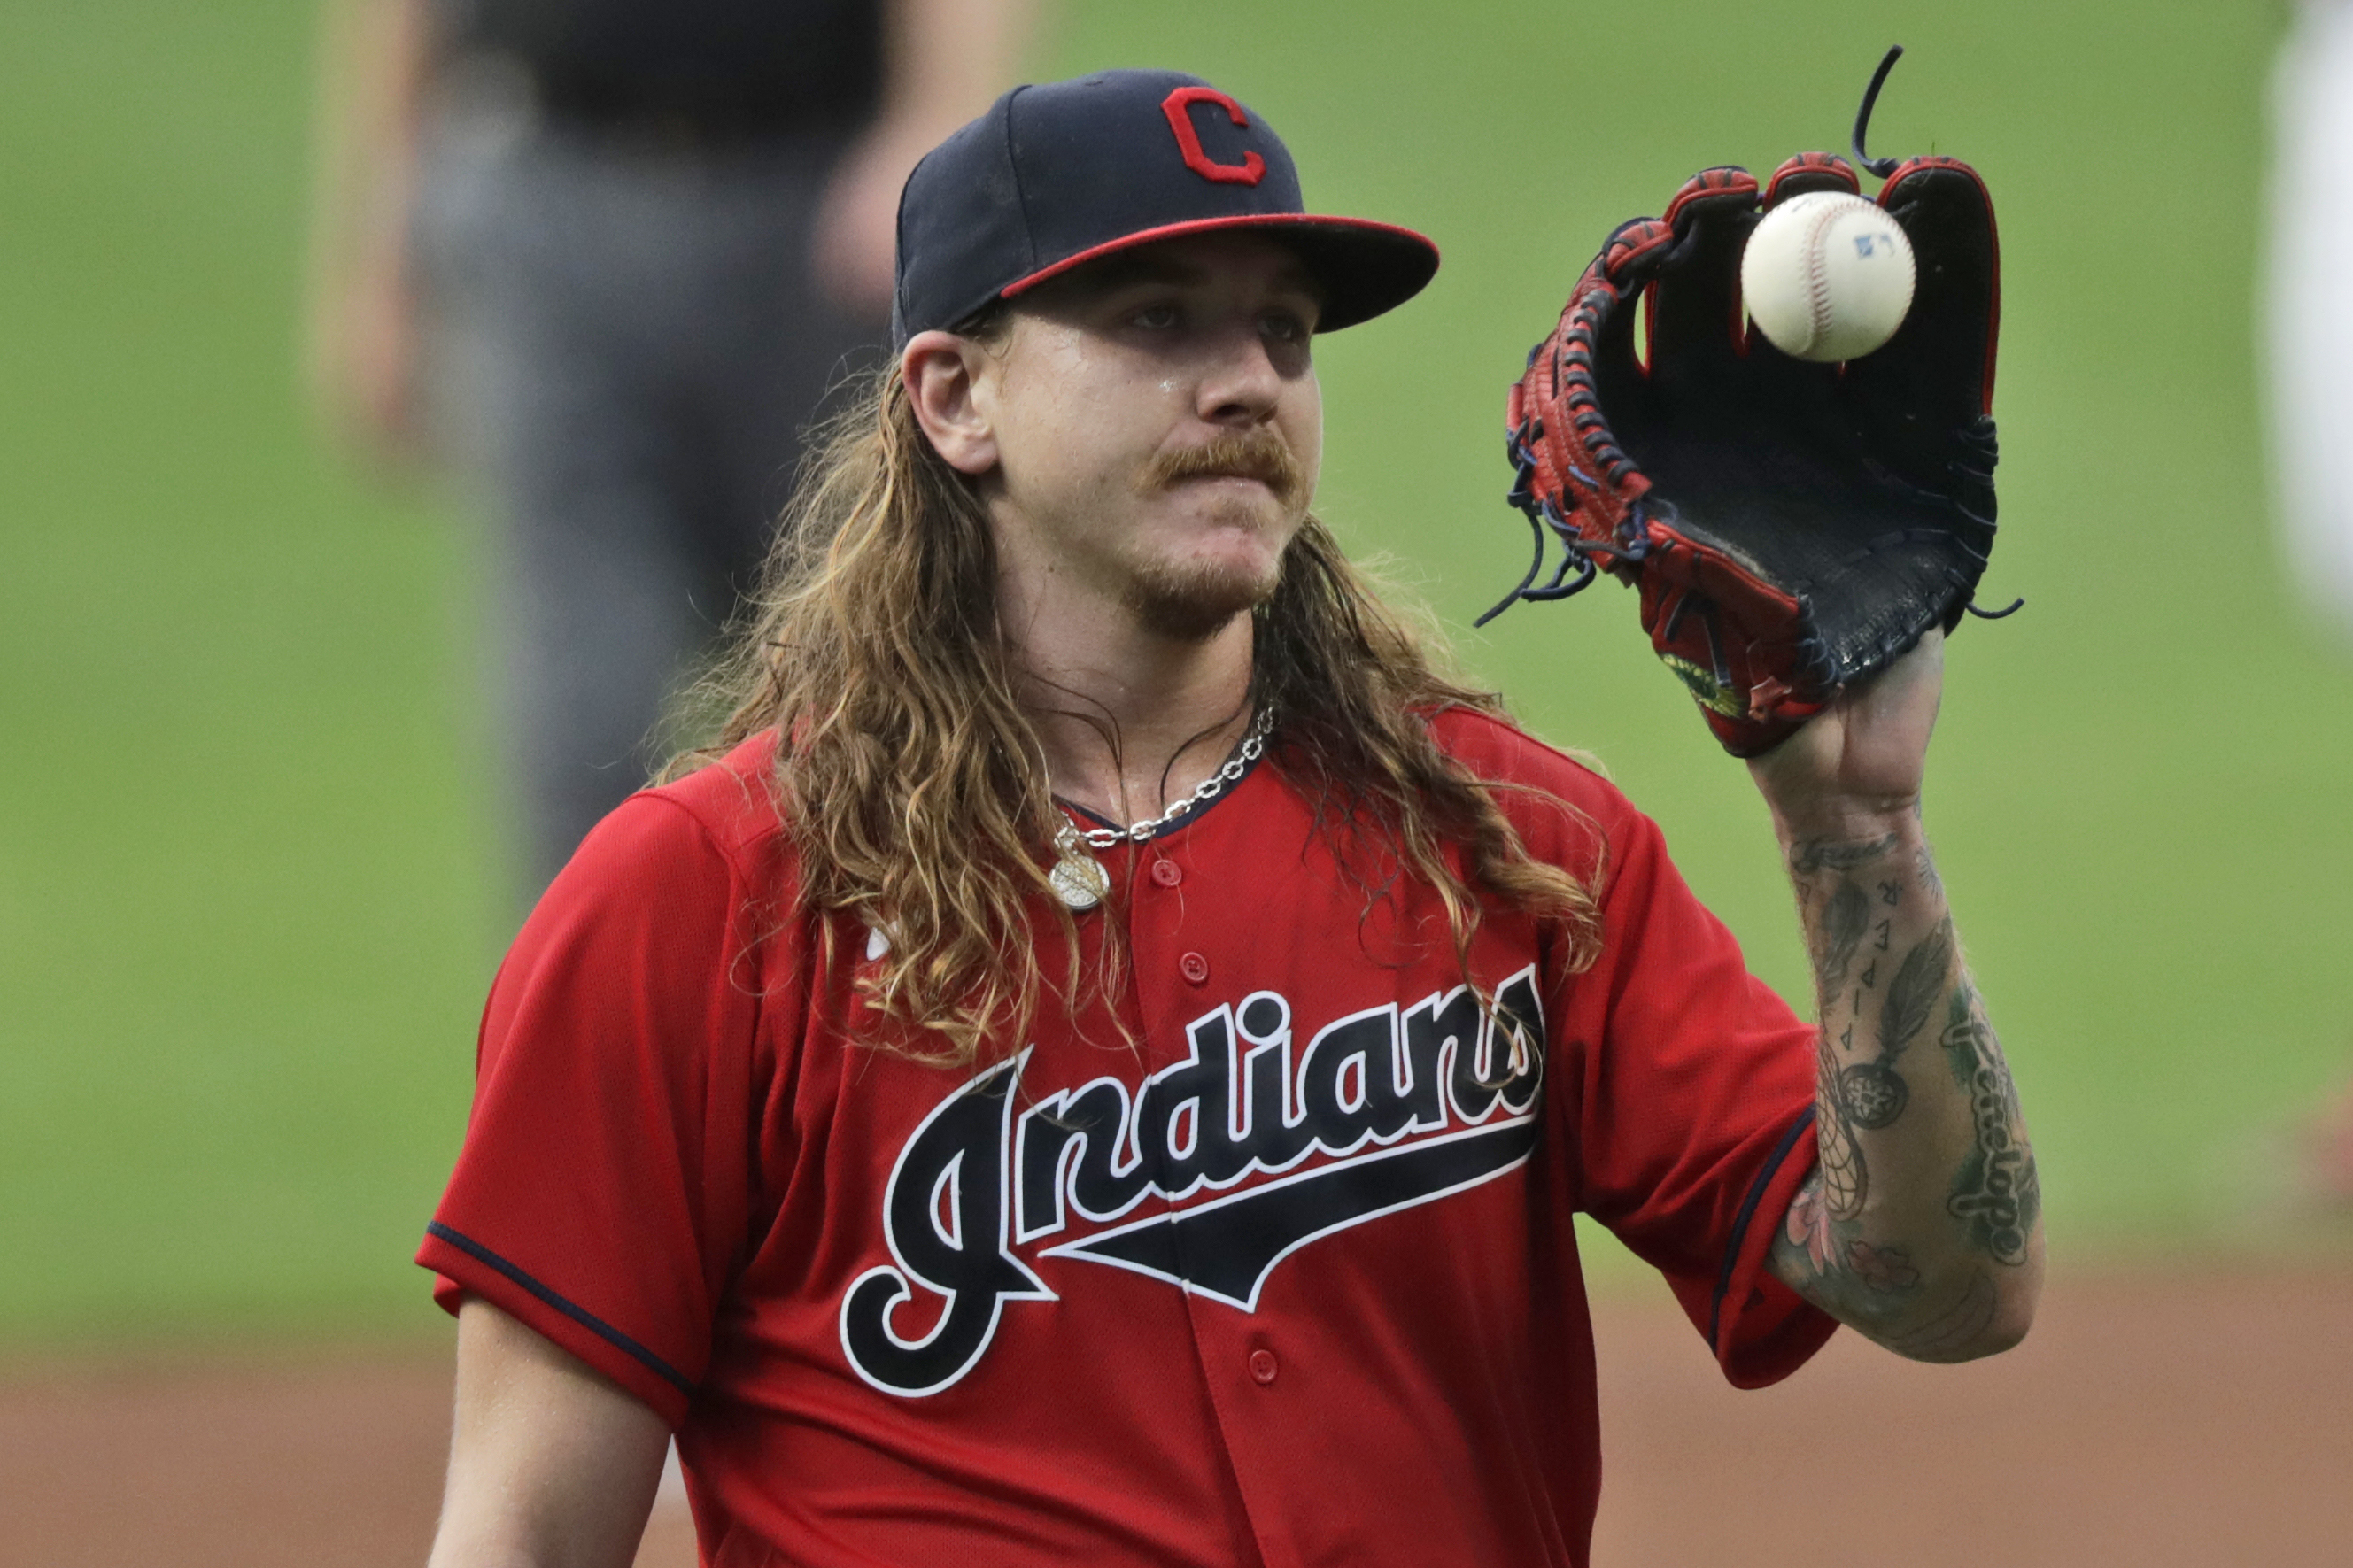 Padres get Clevinger from Indians in 5th trade in 3 days